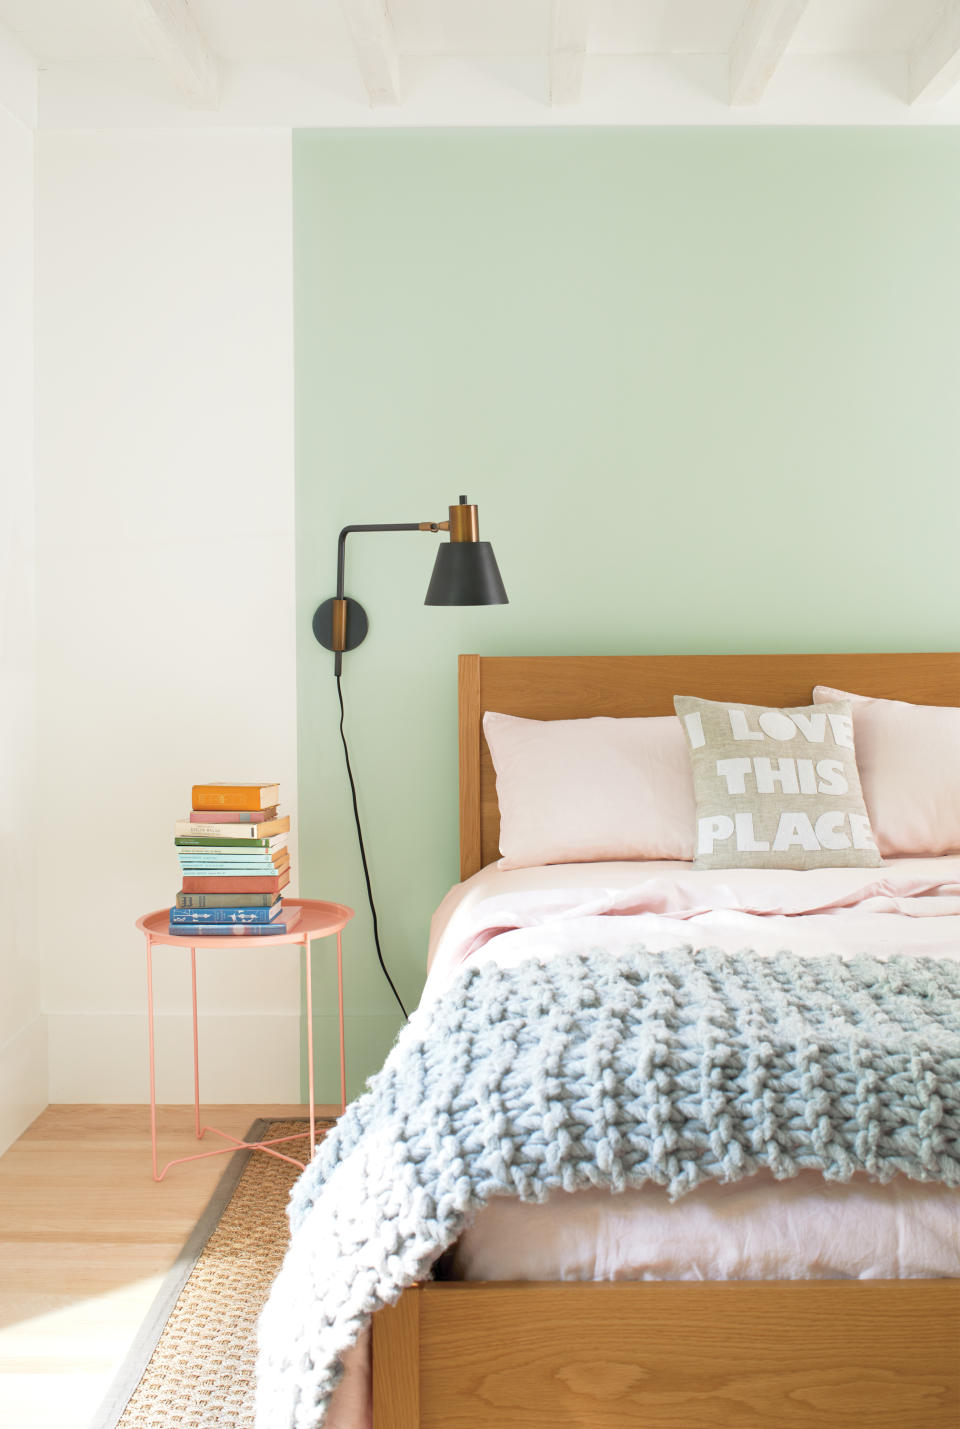 <p> If there's one room where we need to feel calm, it's the bedroom, so any green bedrooms are a great way to go. For many of us, the thought of an all-over color is too much. So if you'd be happier sticking with a neutral backdrop, think creatively to find a space where you could create an accent. Here, a block of soft pastel green has been painted to create the effect of an extended headboard, framing the bed and giving the room a clear central focal point.  </p>